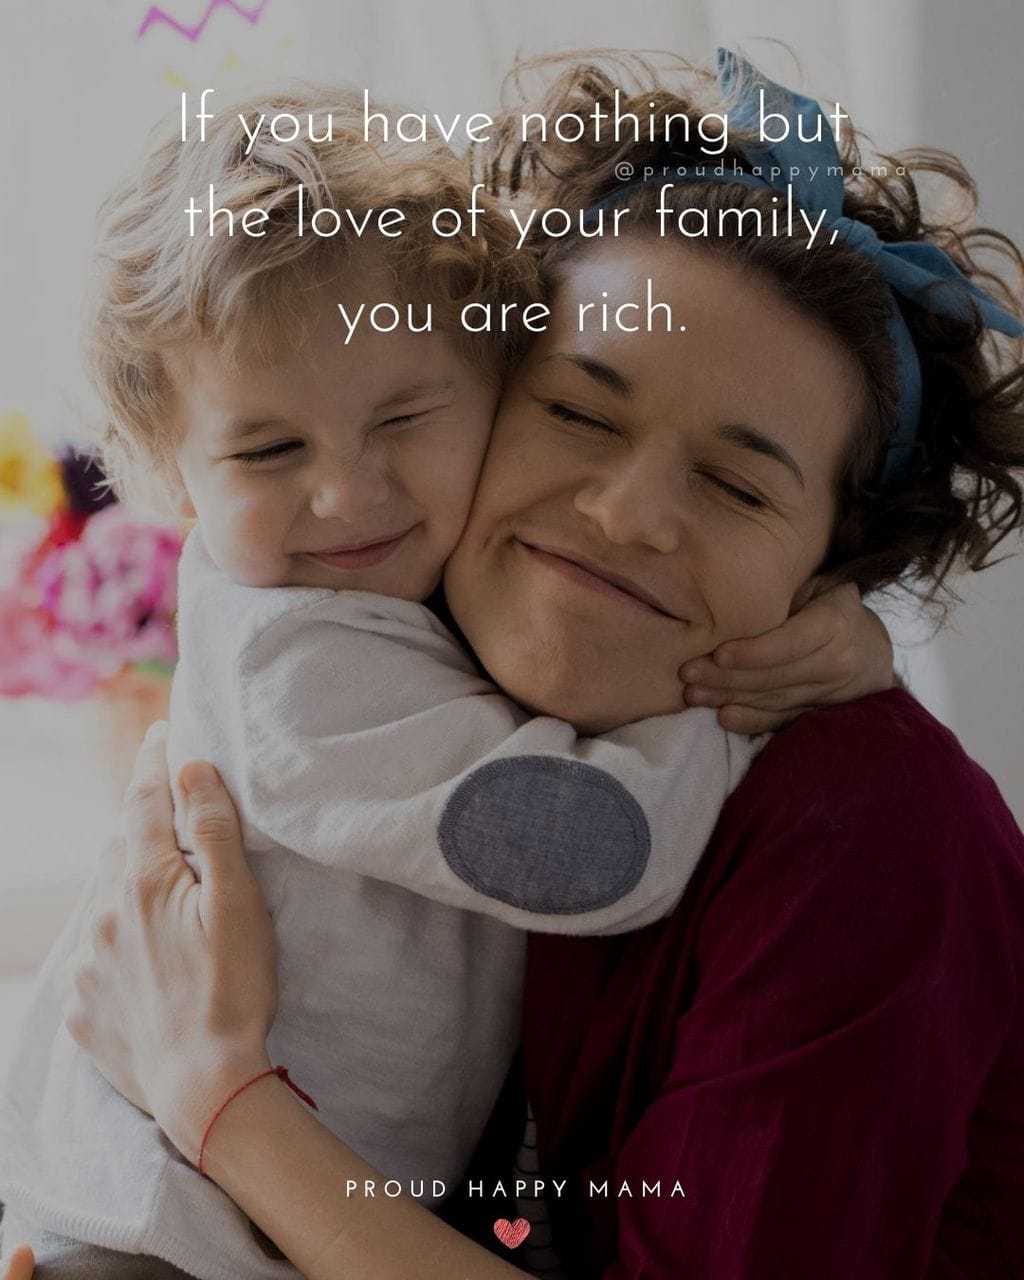 A Happy Family Quotes | If you have nothing but the love of your family, you are rich.